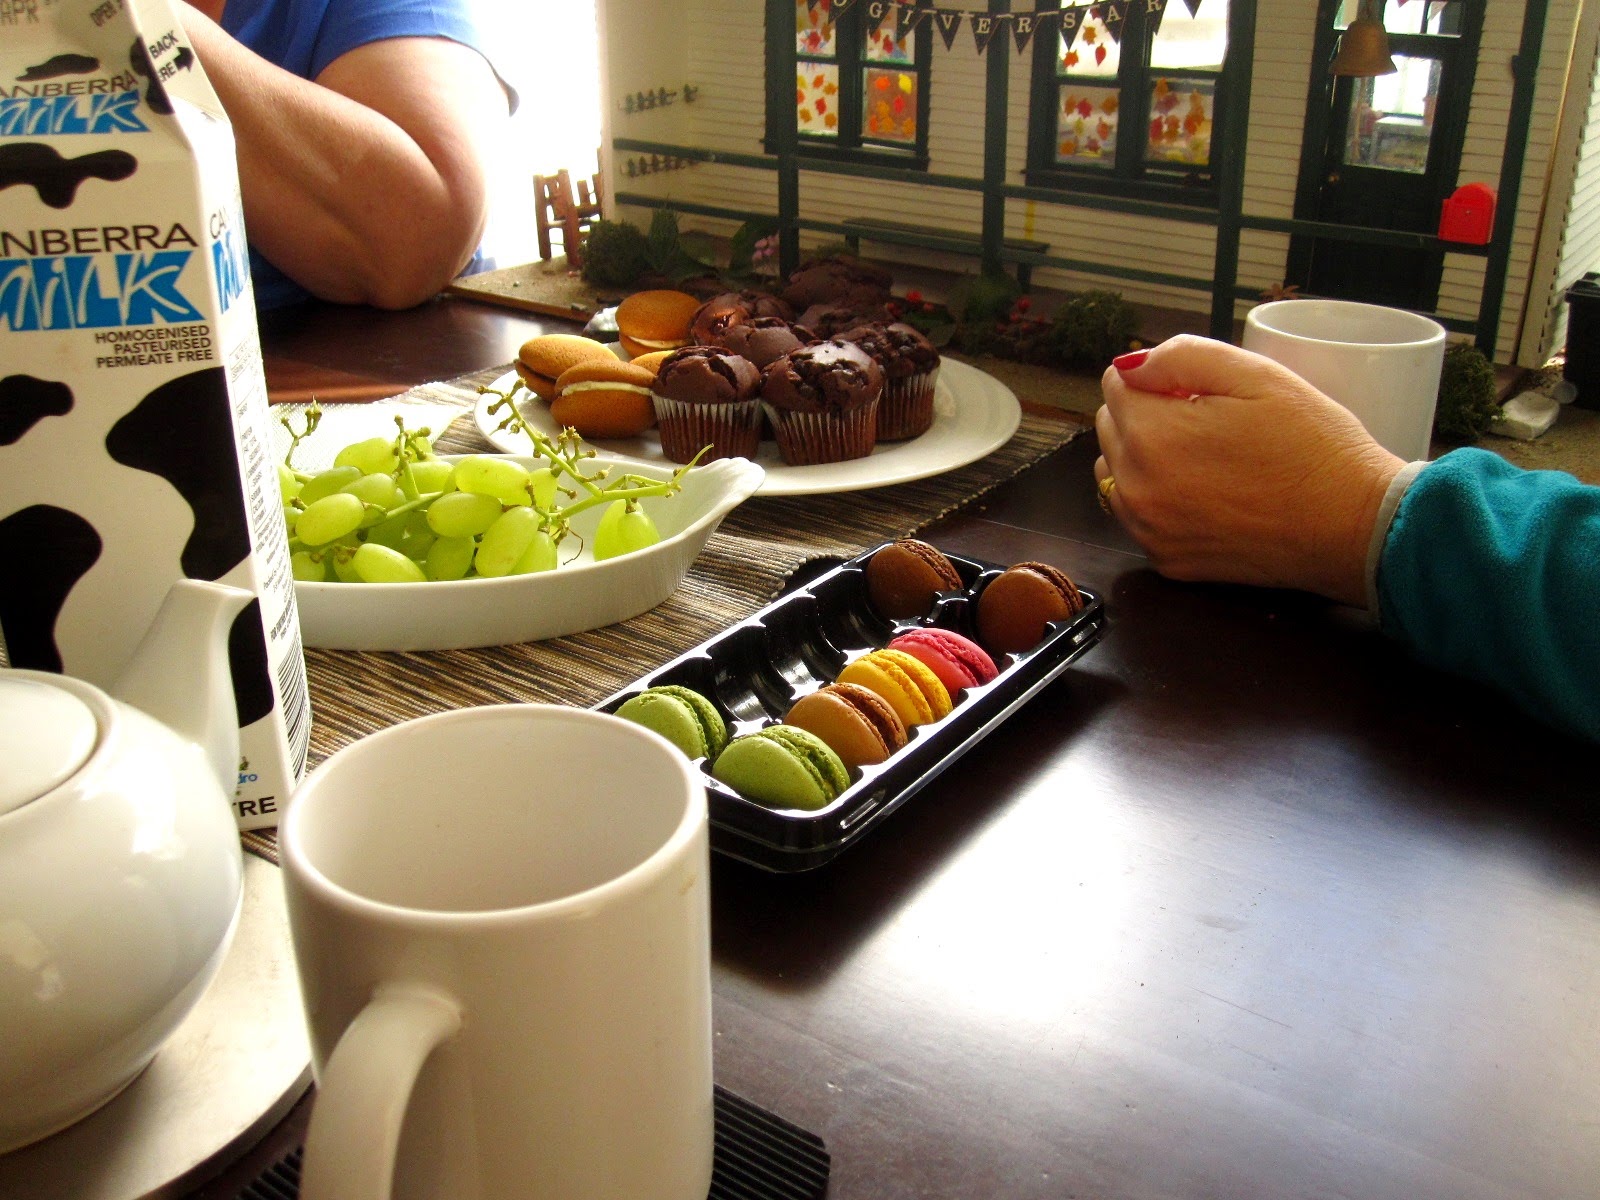 A selection of morning tea treats set out on a table in front of a modern miniatures dolls' house school